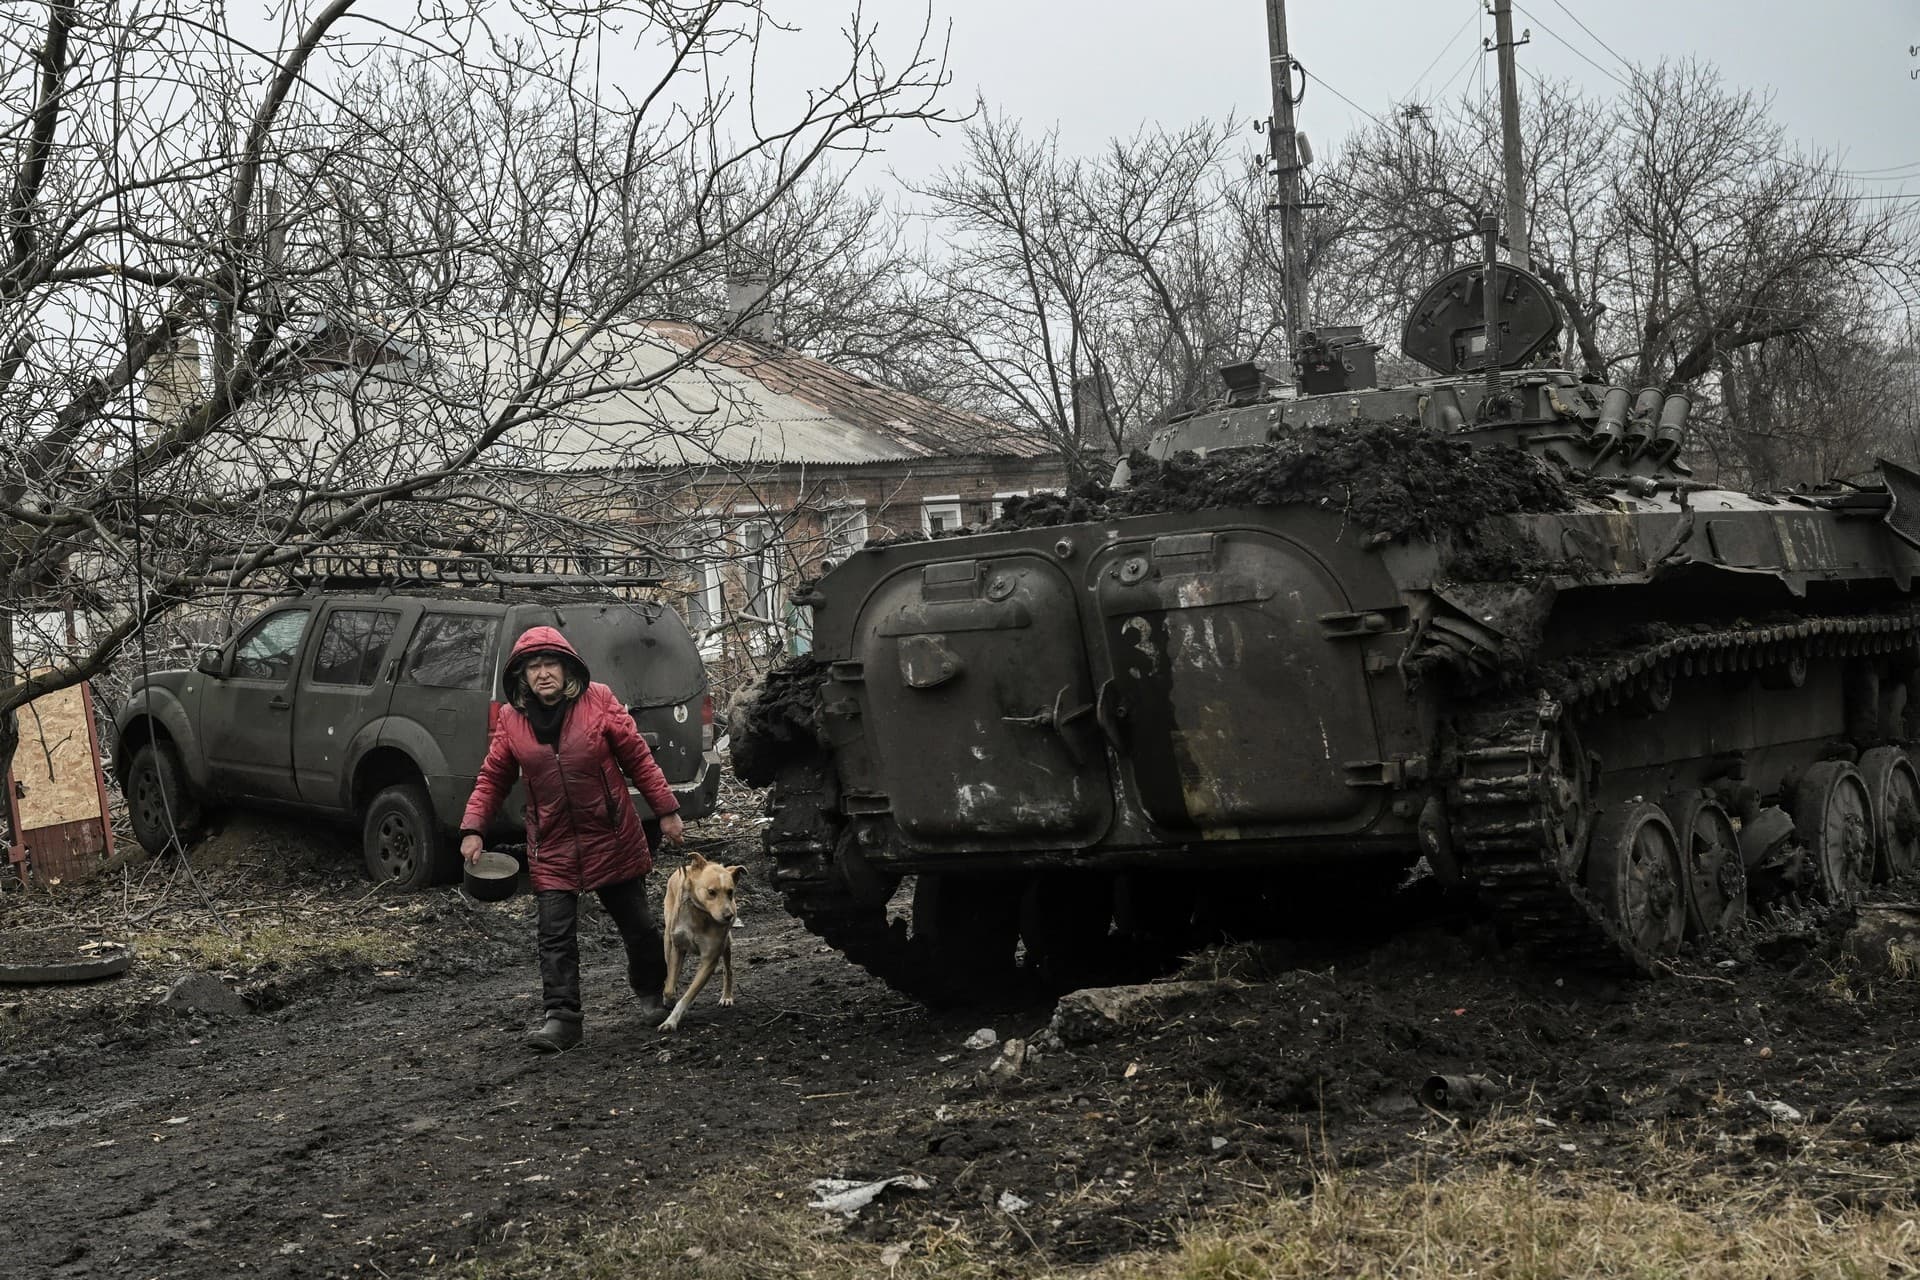 A woman walks past a destroyed BMP-2 tank after shelling in the village of Chasiv Yar